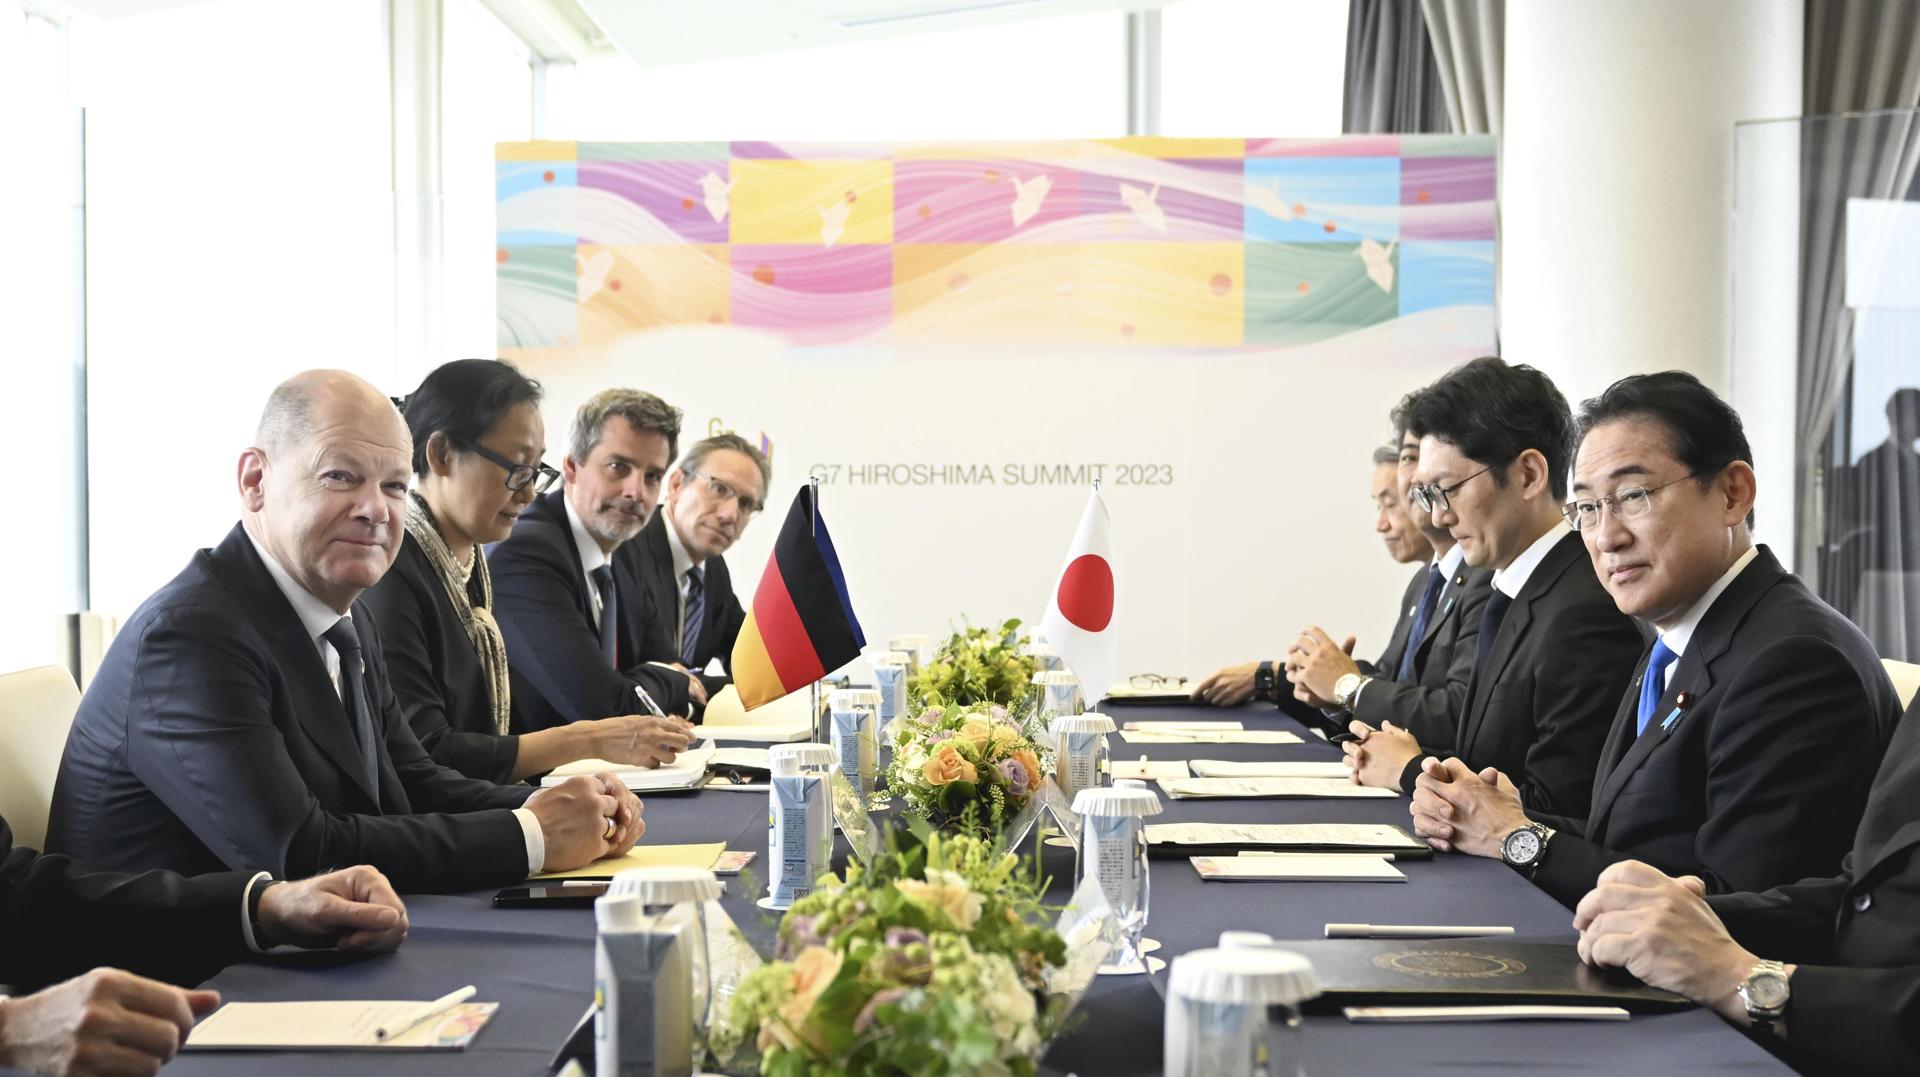 German Chancellor Olaf Scholz (L) and Japanese Prime Minister Fumio Kishida (R) attend their bilateral meeting at the G7 Summit, in Hiroshima, Japan, 19 May 2023. EFE-EPA/POOL JAPAN OUT EDITORIAL USE ONLY/NO SALES
